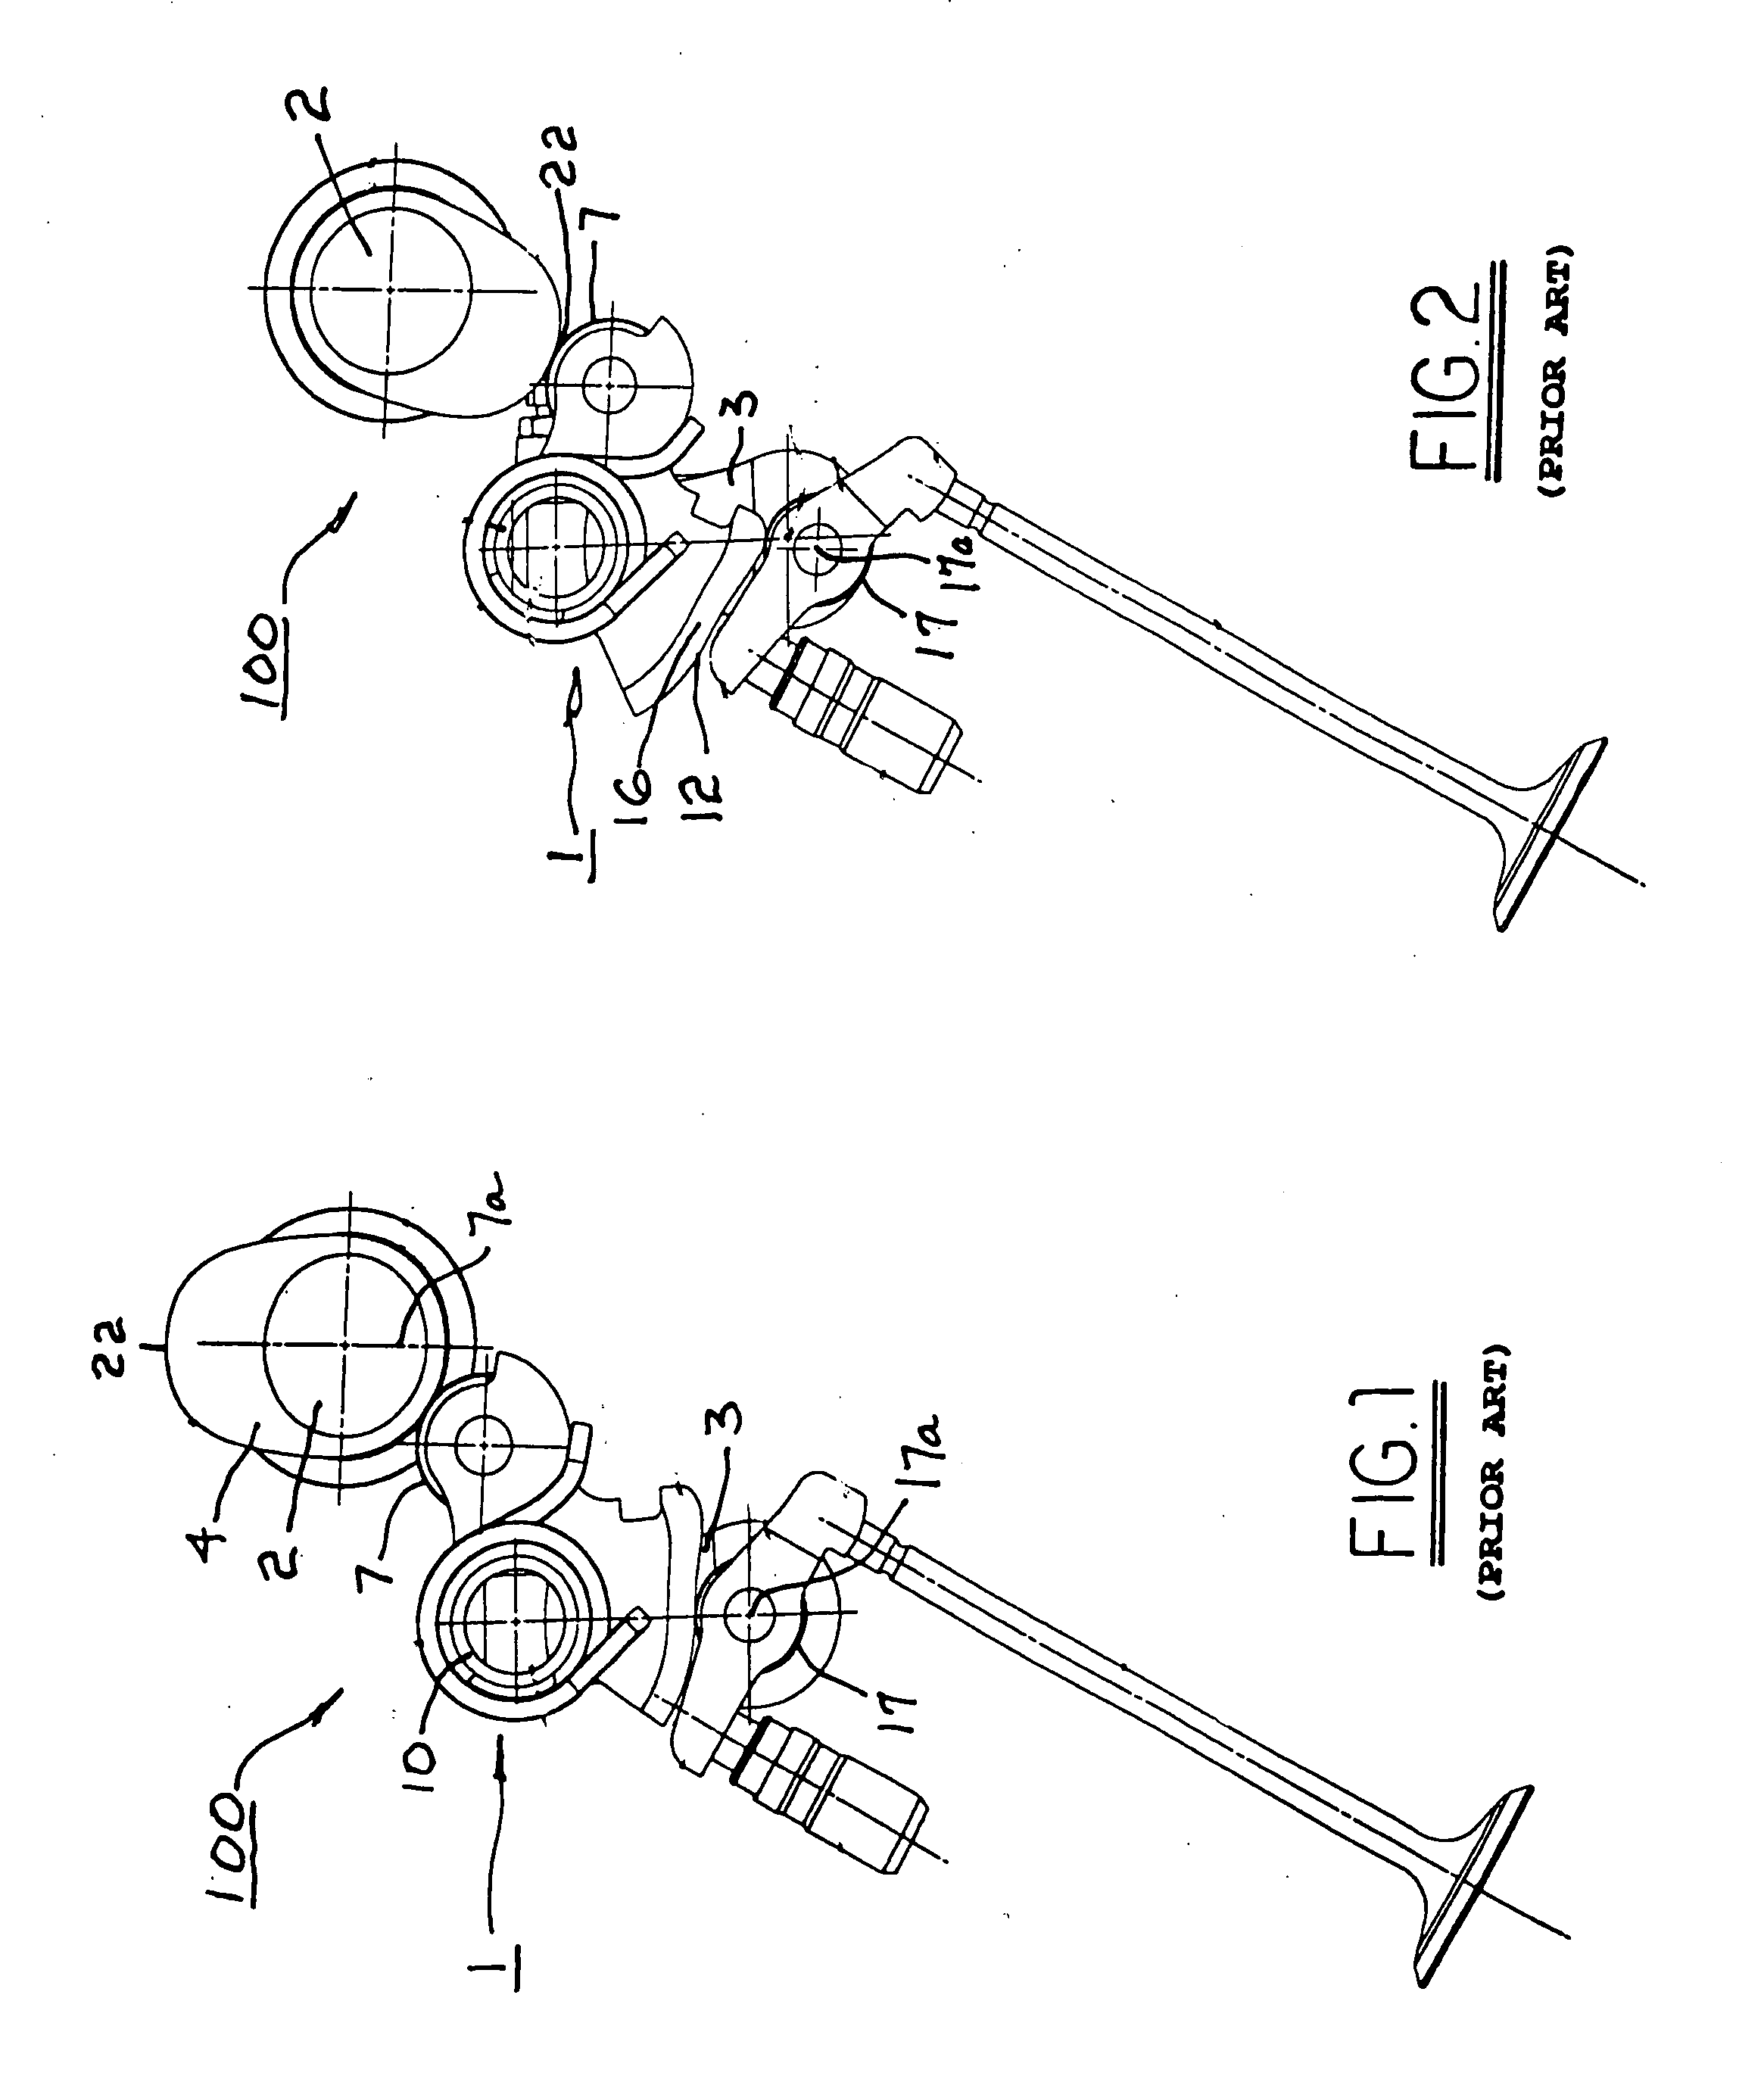 Phaser-actuated continuously variable valve actuation system with lost motion capability